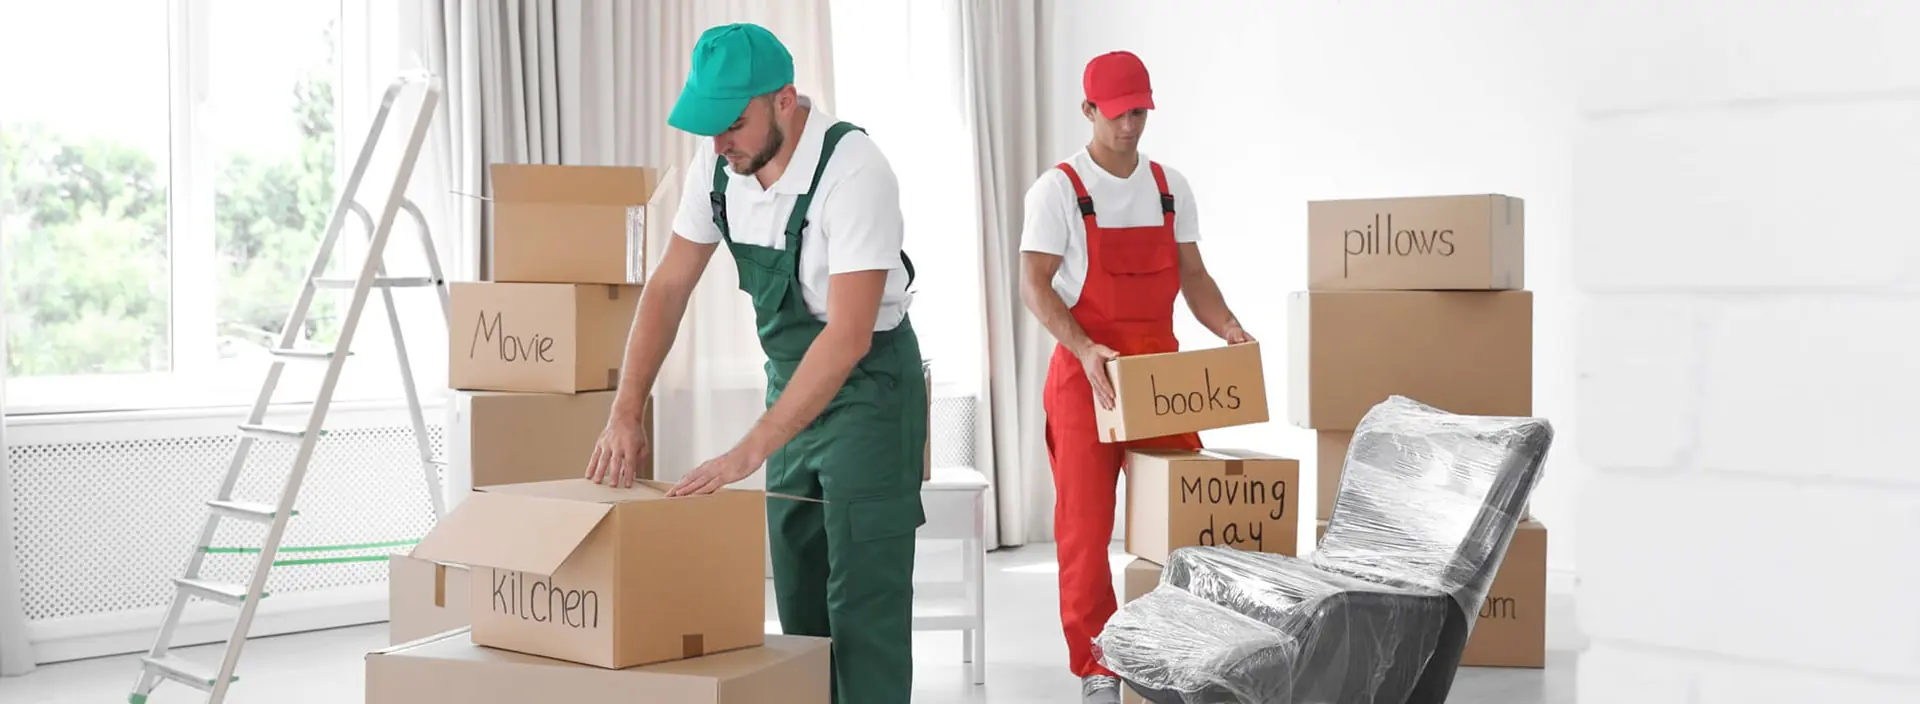 Packing service is important for your removal